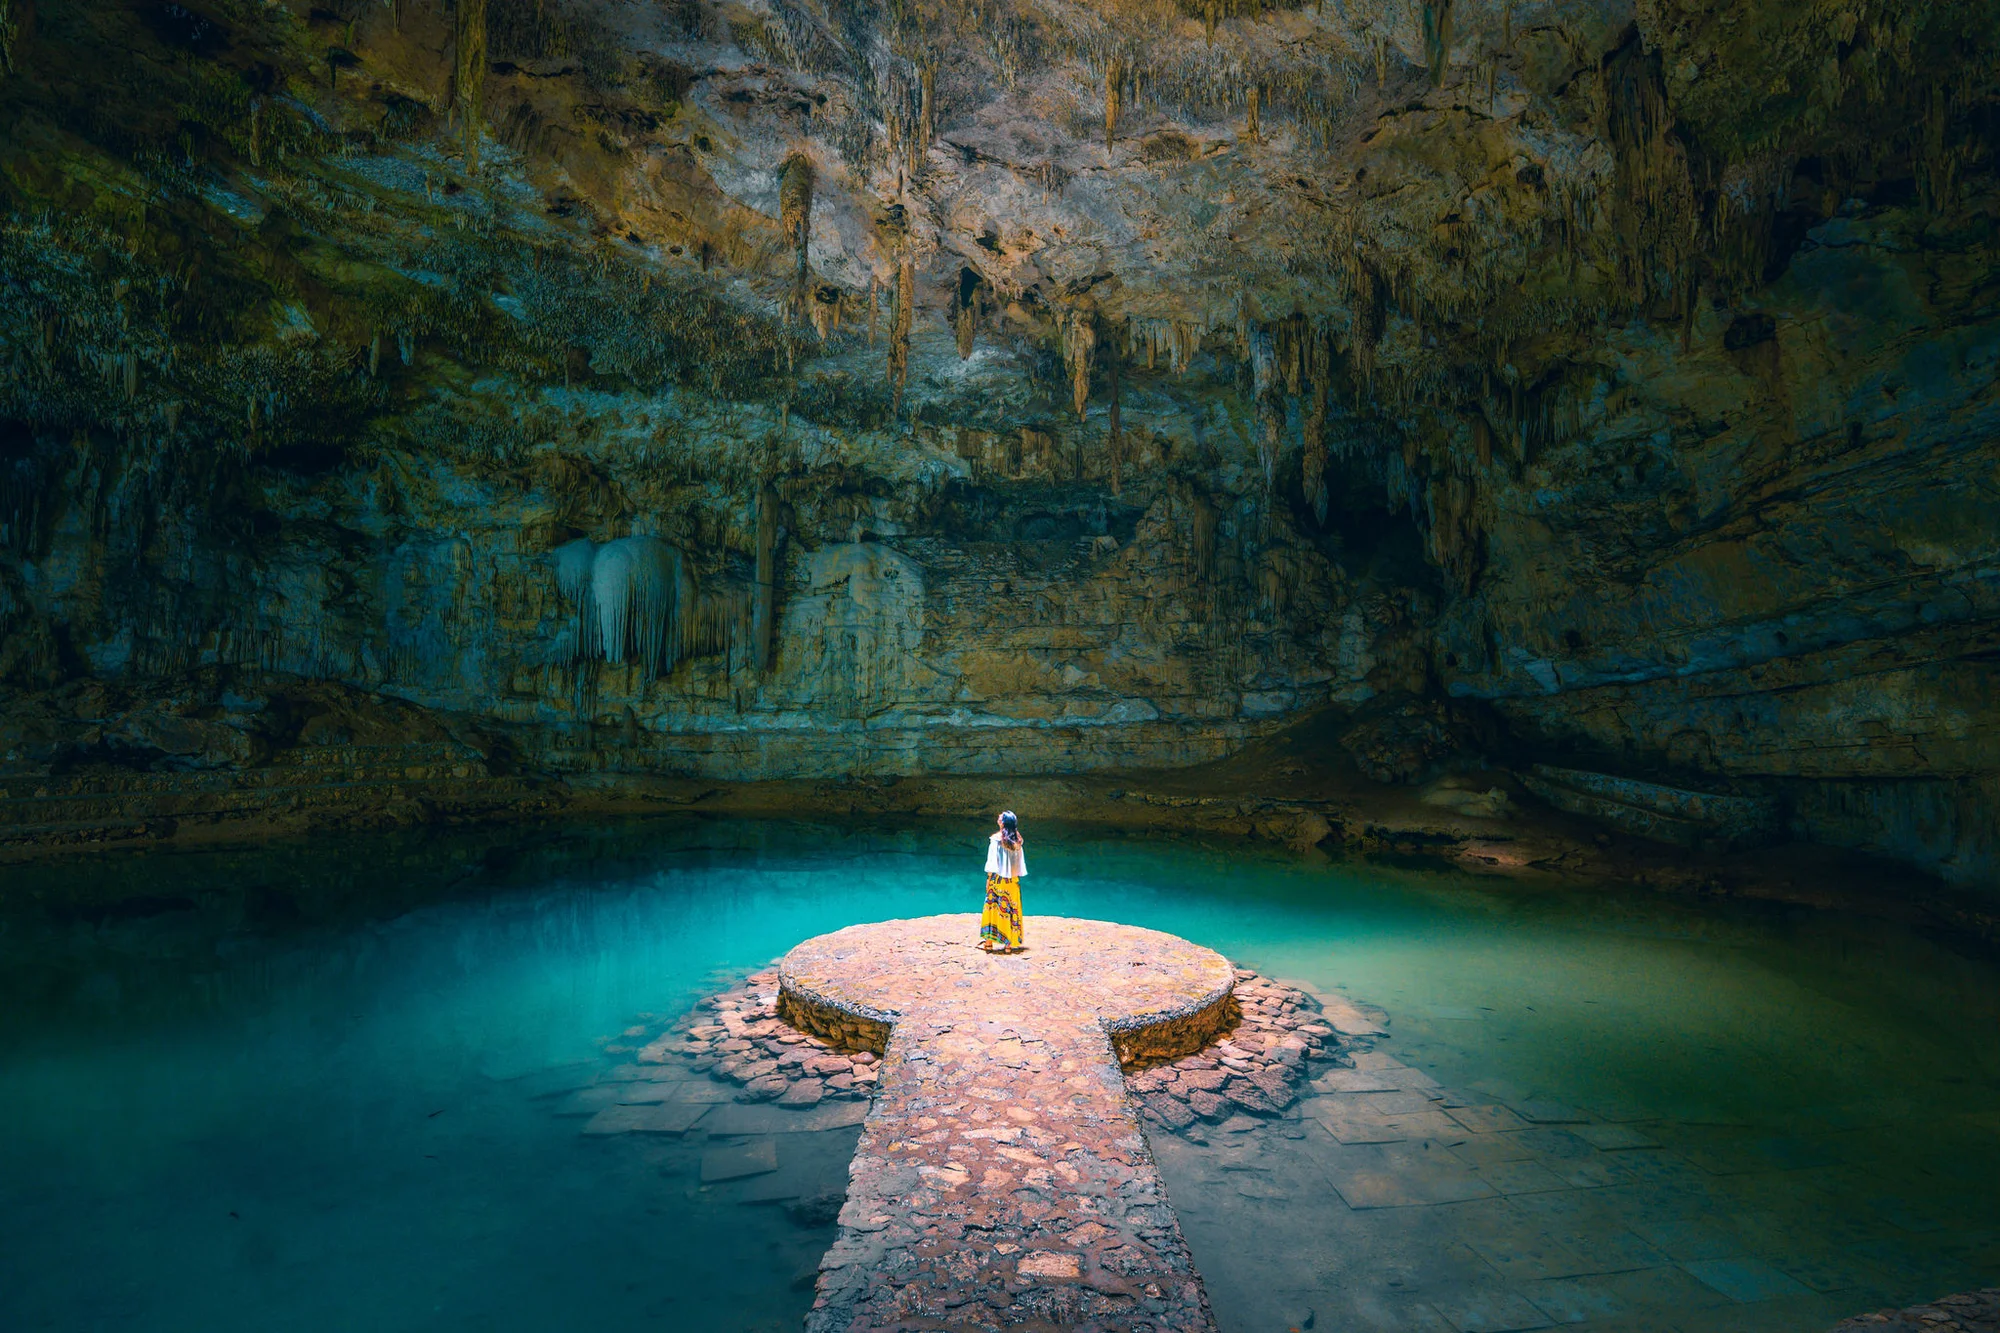 Woman standing alone in a cenote in Mexico